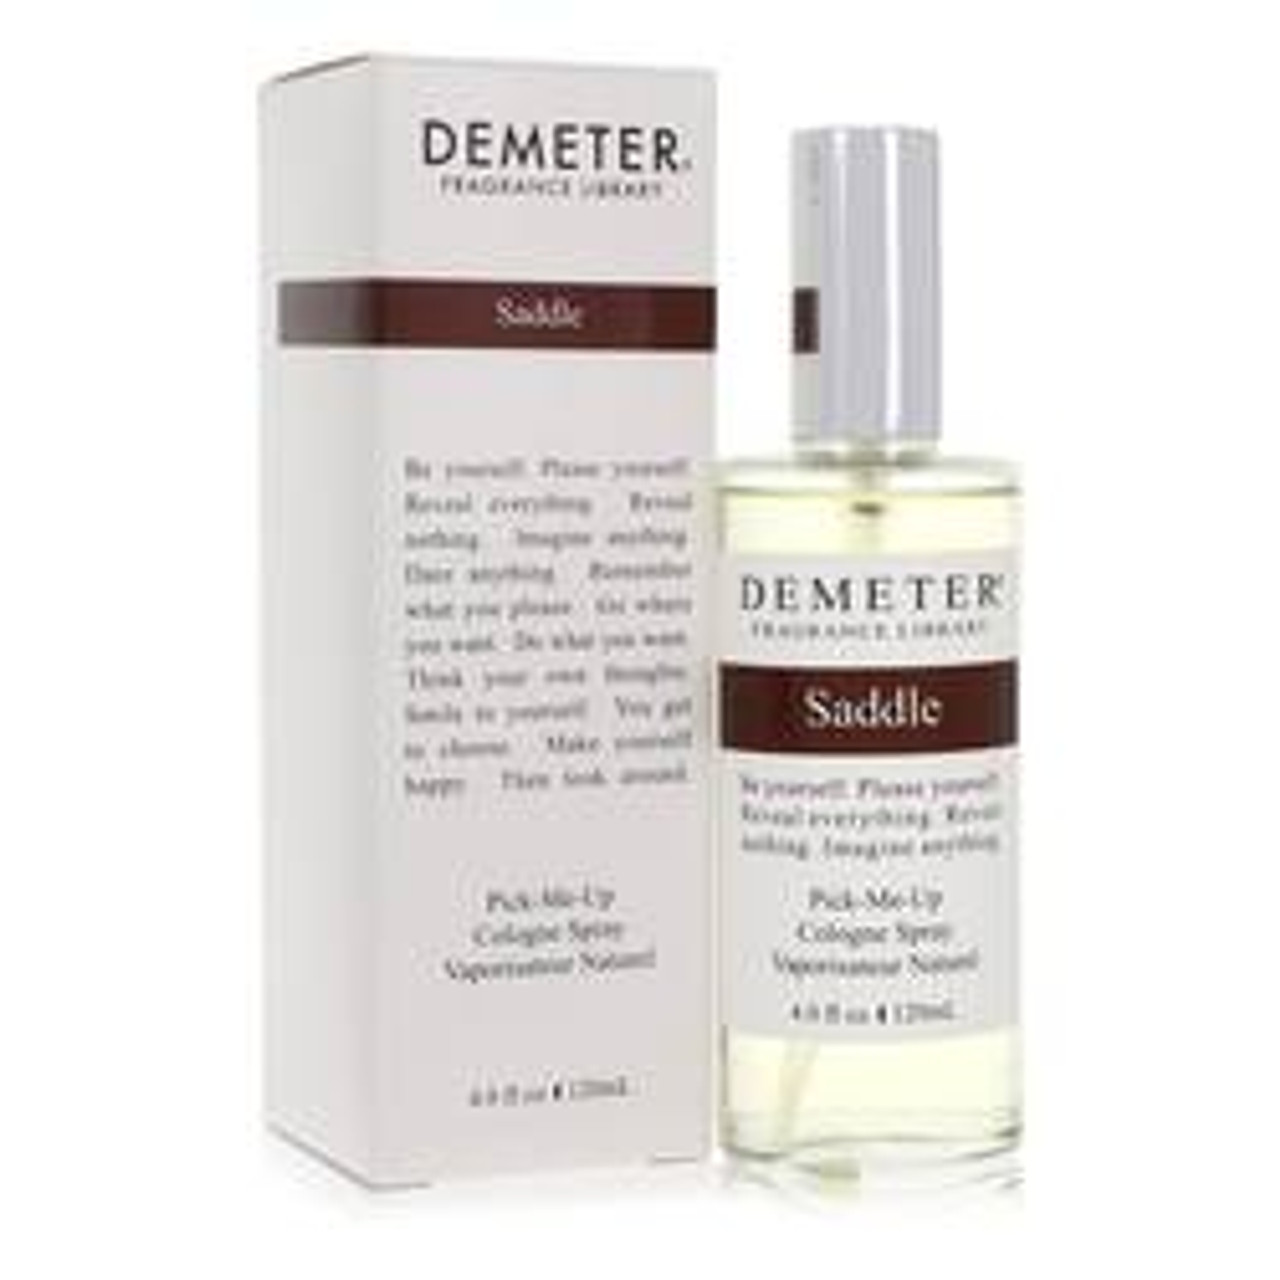 Demeter Saddle Perfume By Demeter Cologne Spray 4 oz for Women - [From 79.50 - Choose pk Qty ] - *Ships from Miami